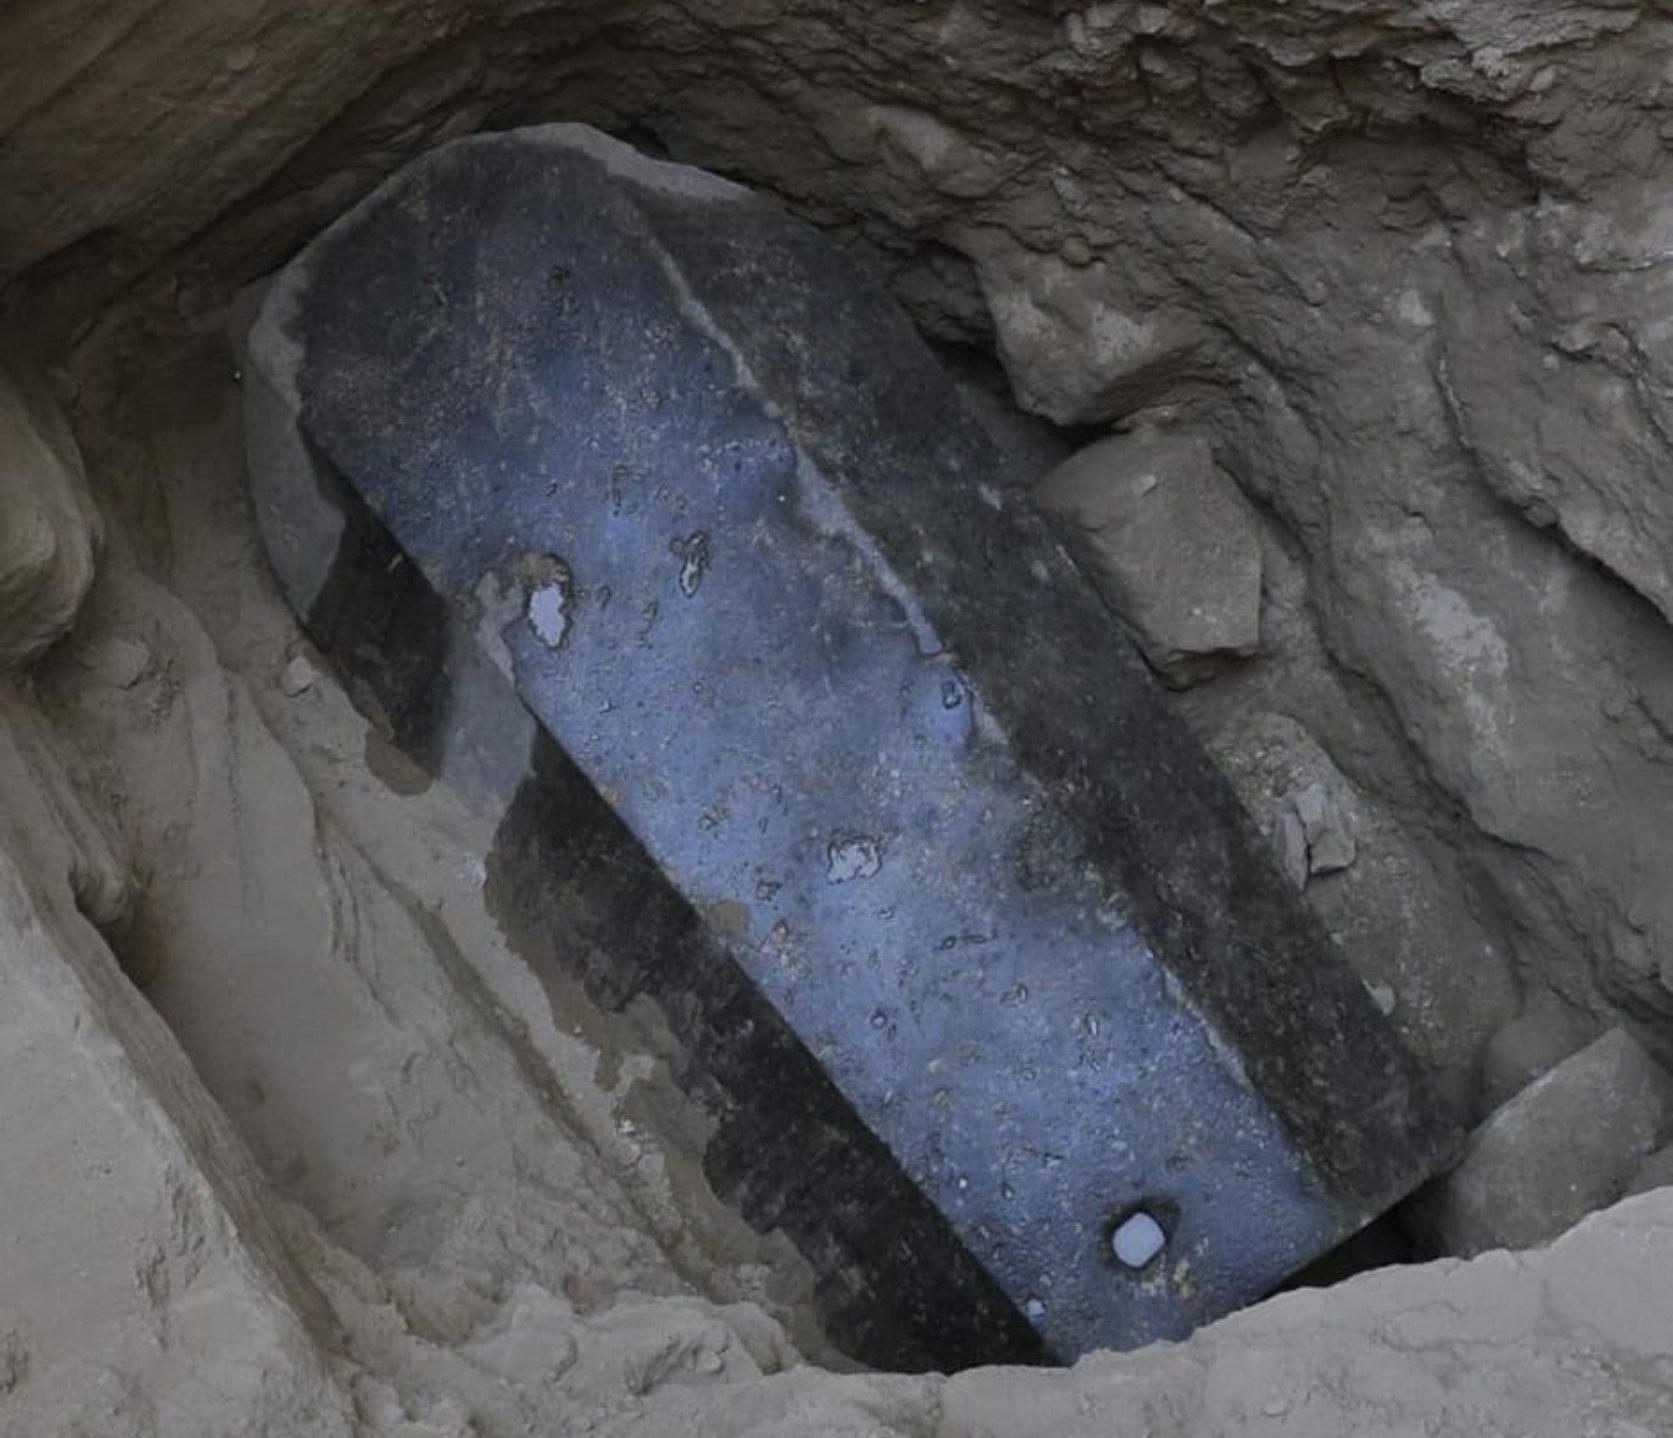 This black granite sarcophagus was found in a tomb in Alexandria, Egypt. Dating back over 2,000 years, it is the largest sarcophagus ever found in Alexandria, archaeologists believe.